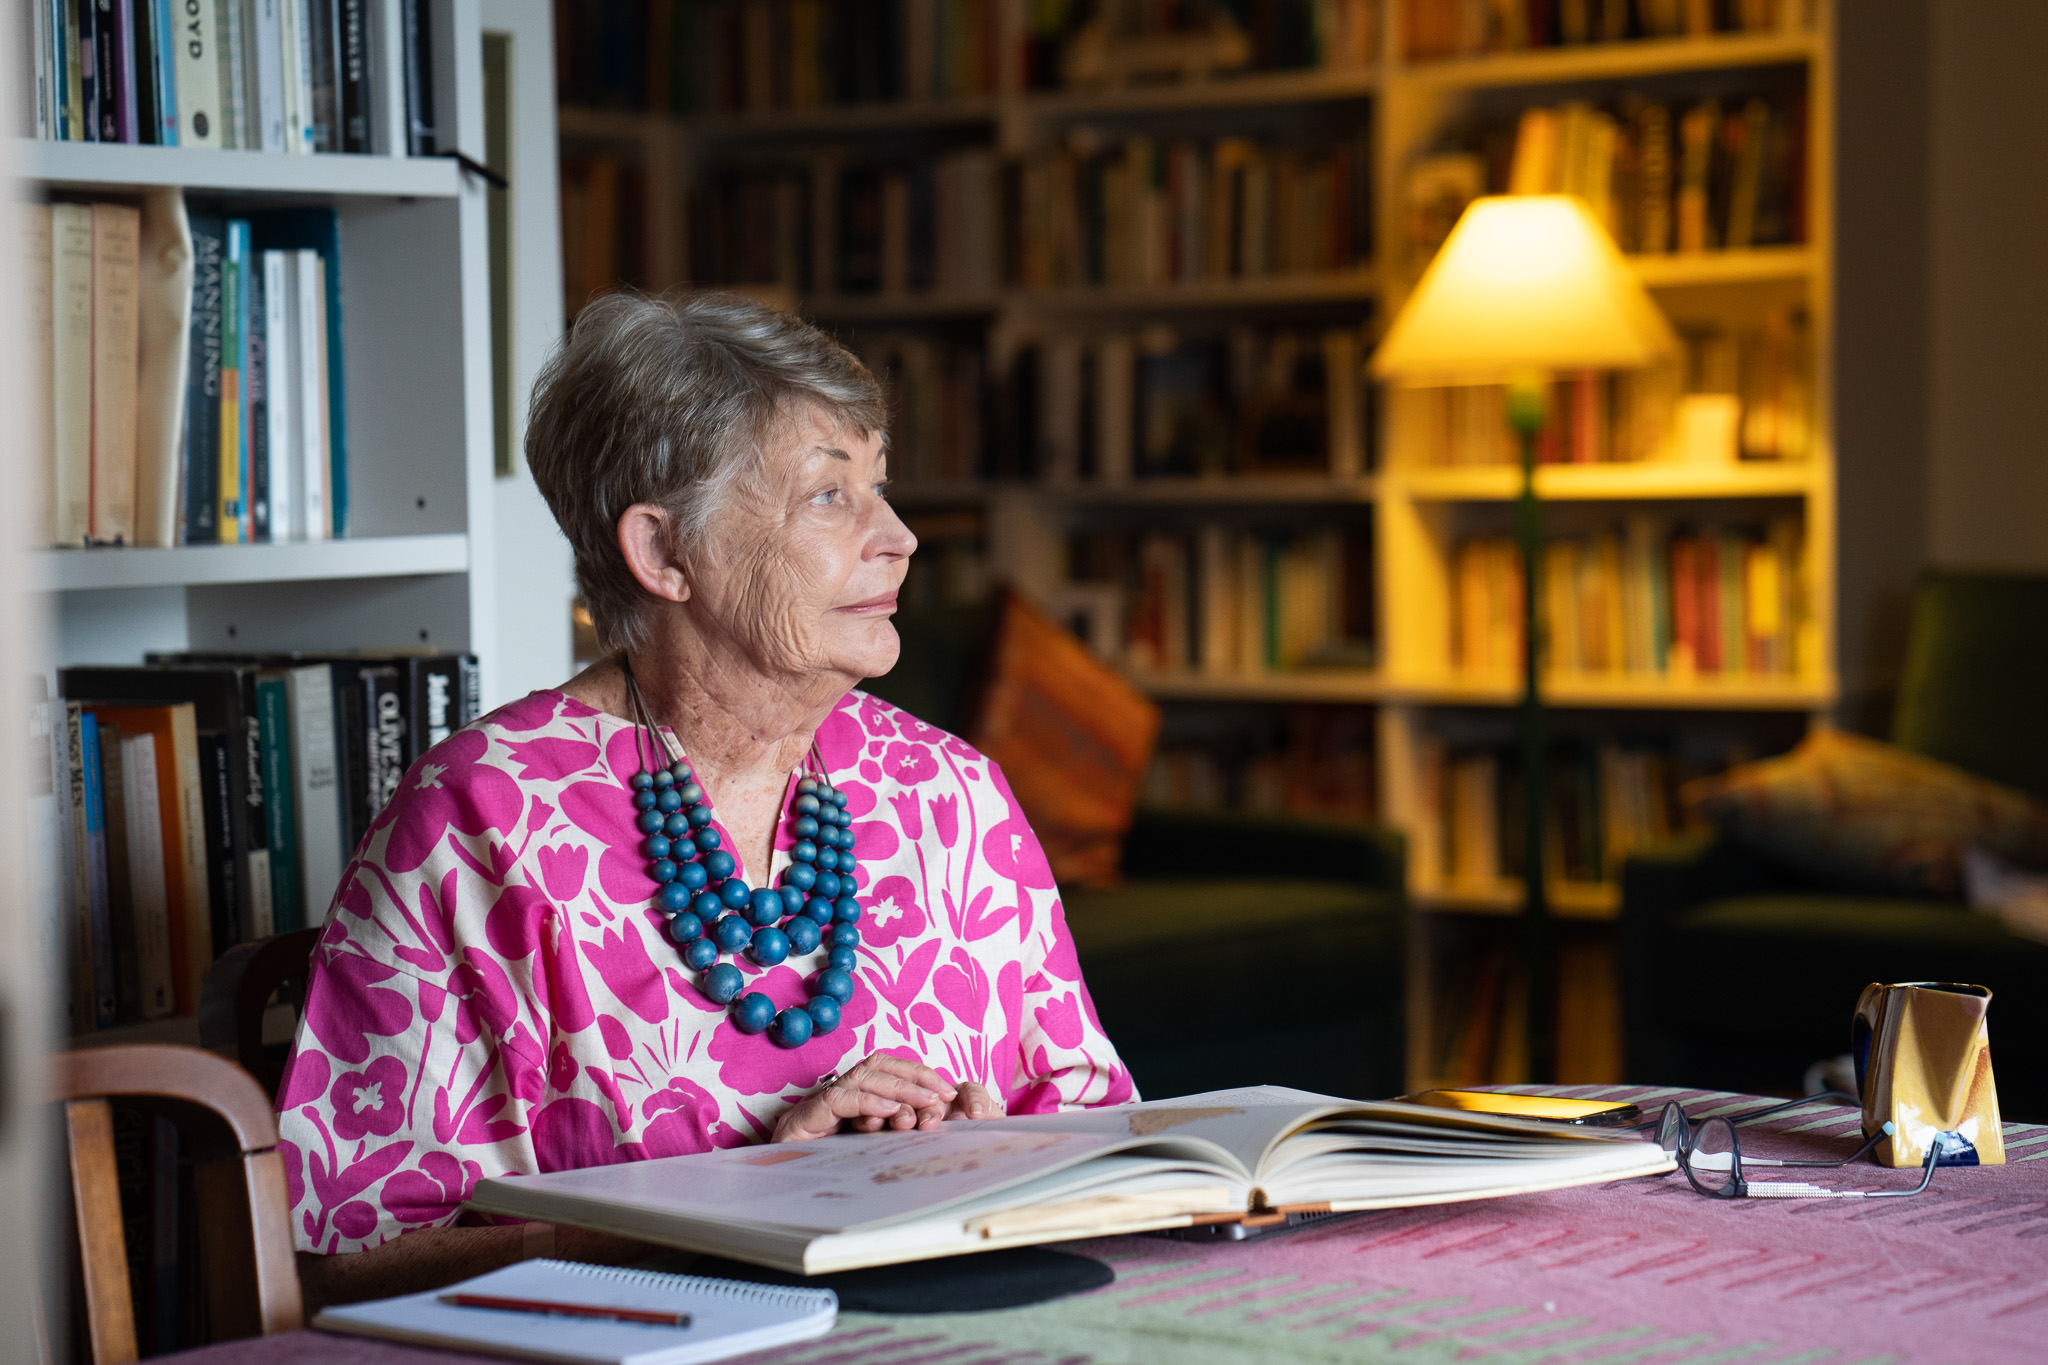 Researcher, Lyndall Ryan, siting in her home studying a book